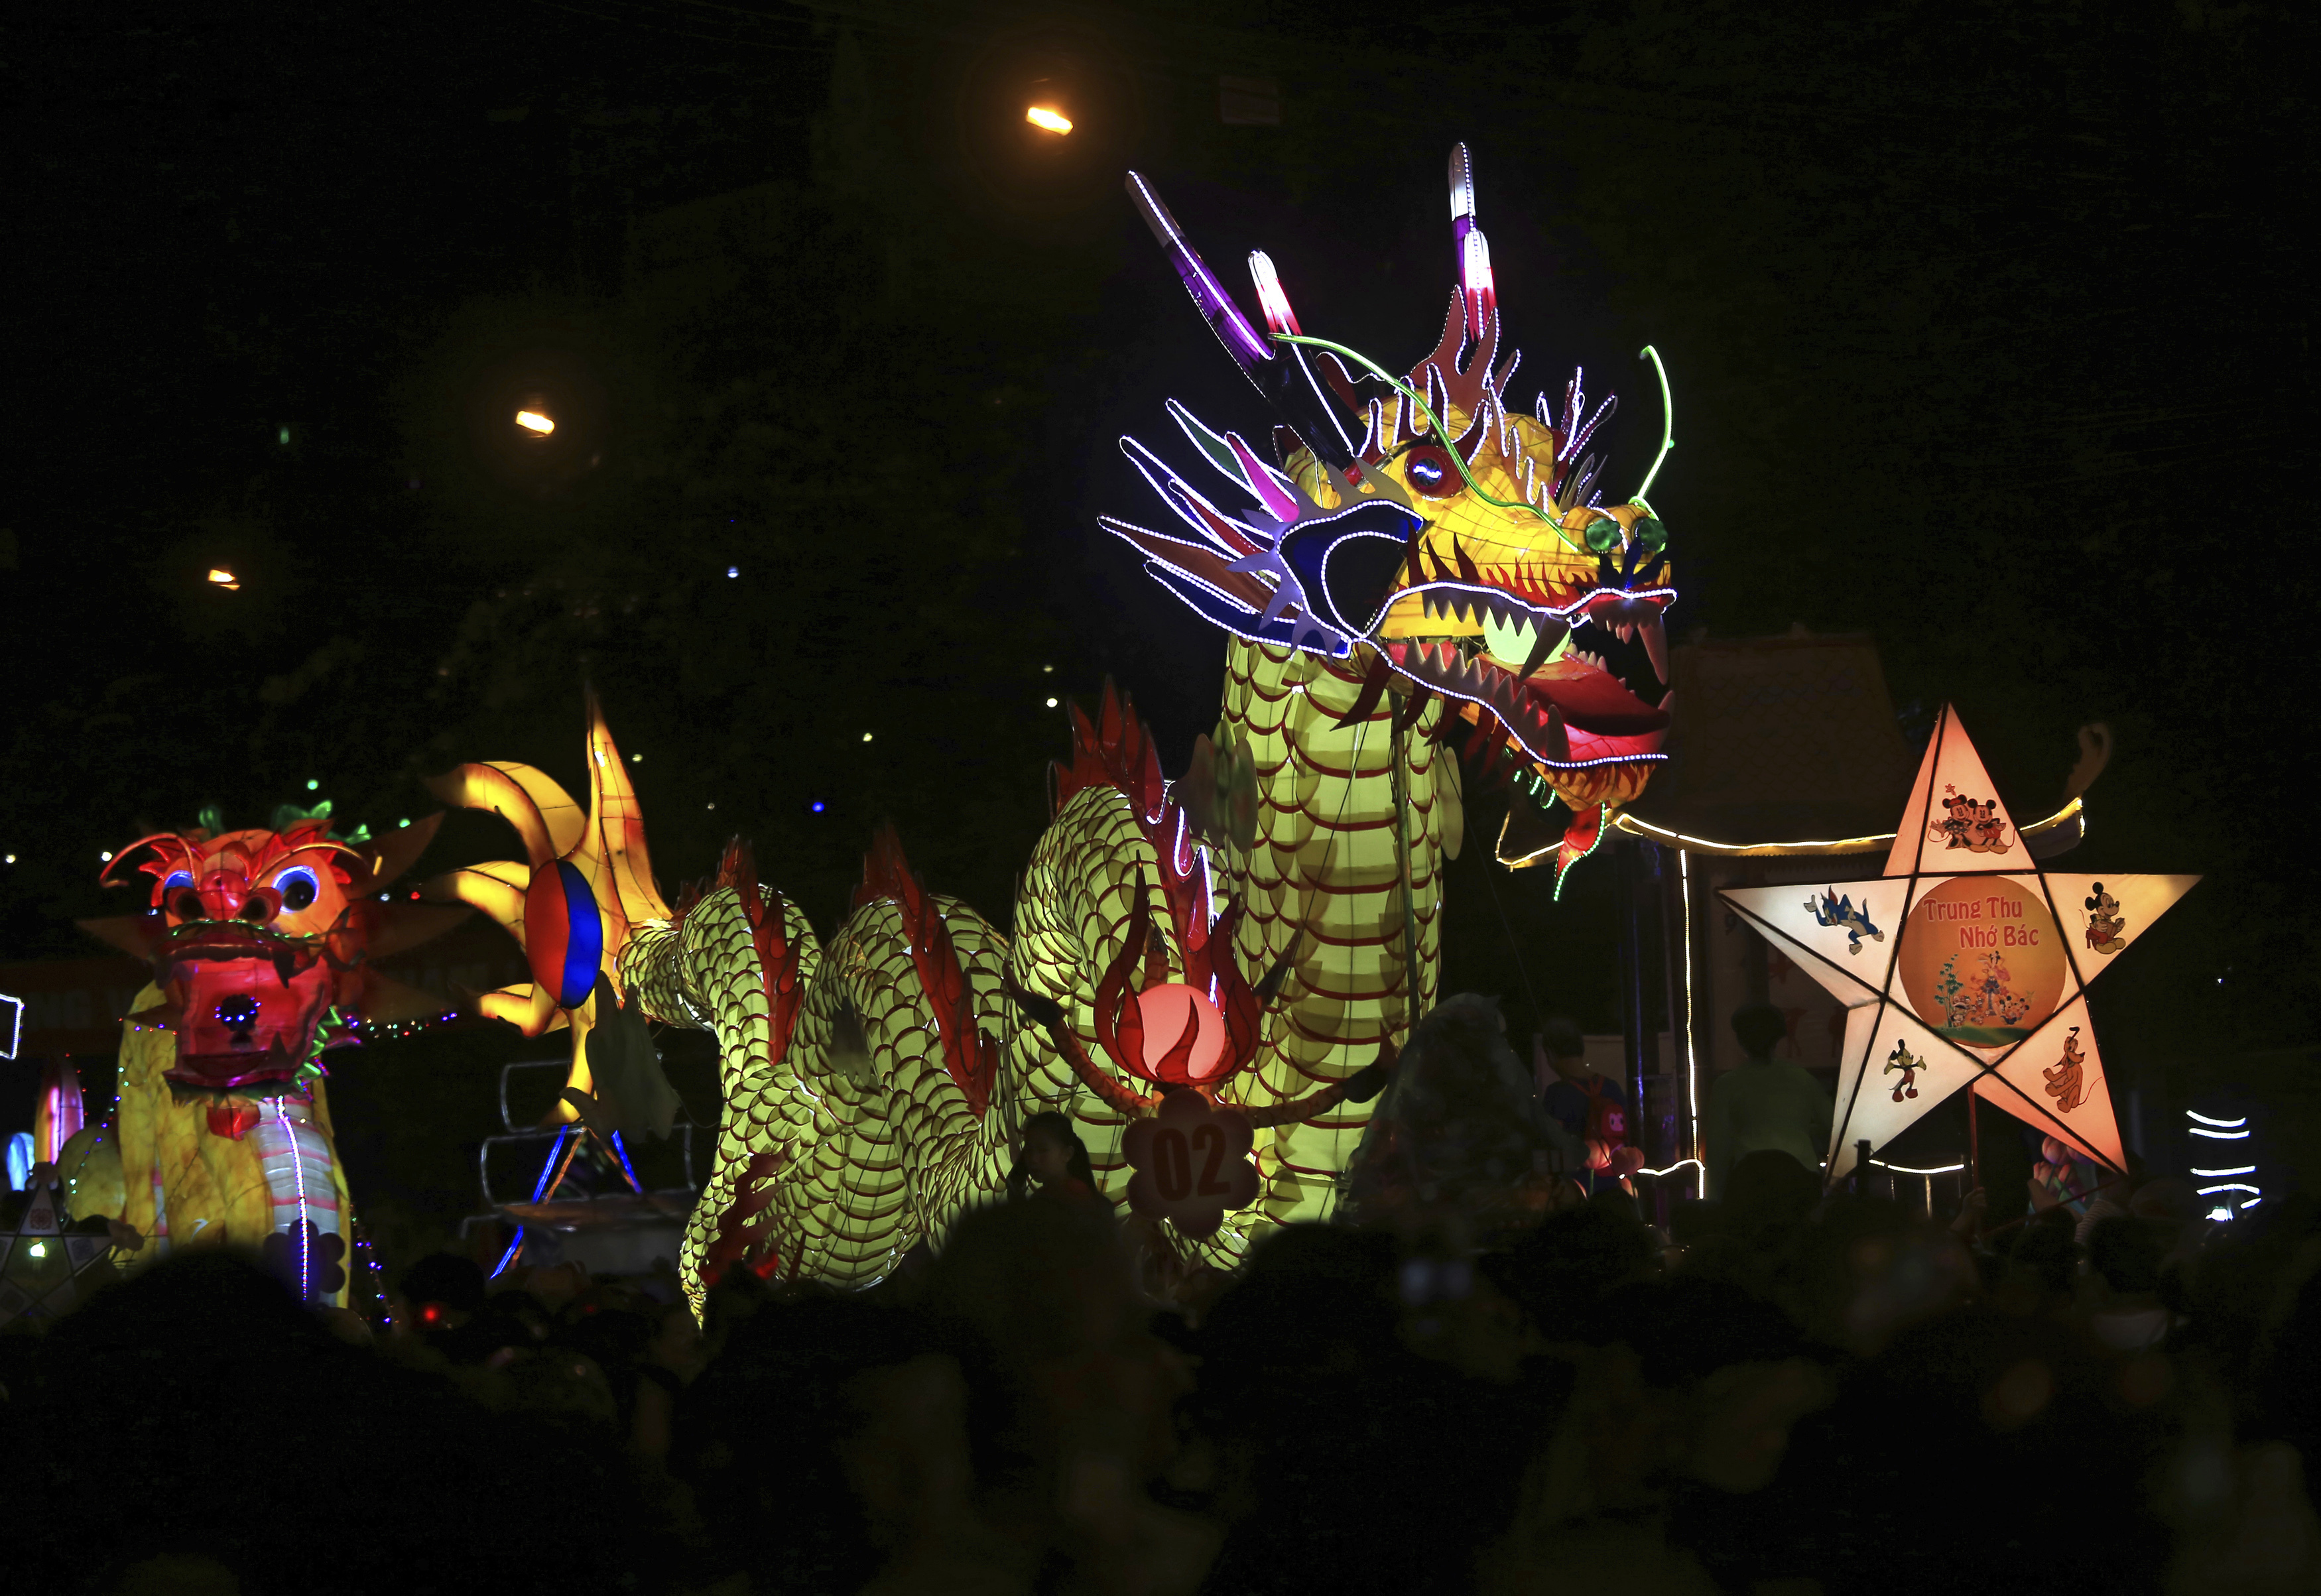 Dragon lantern floats parade through the streets to celebrate the Mid-Autumn, or Moon festival in Tuyen Quang city, Vietnam, Monday, Oct. 2, 2017. (AP Photo/Hau Dinh)